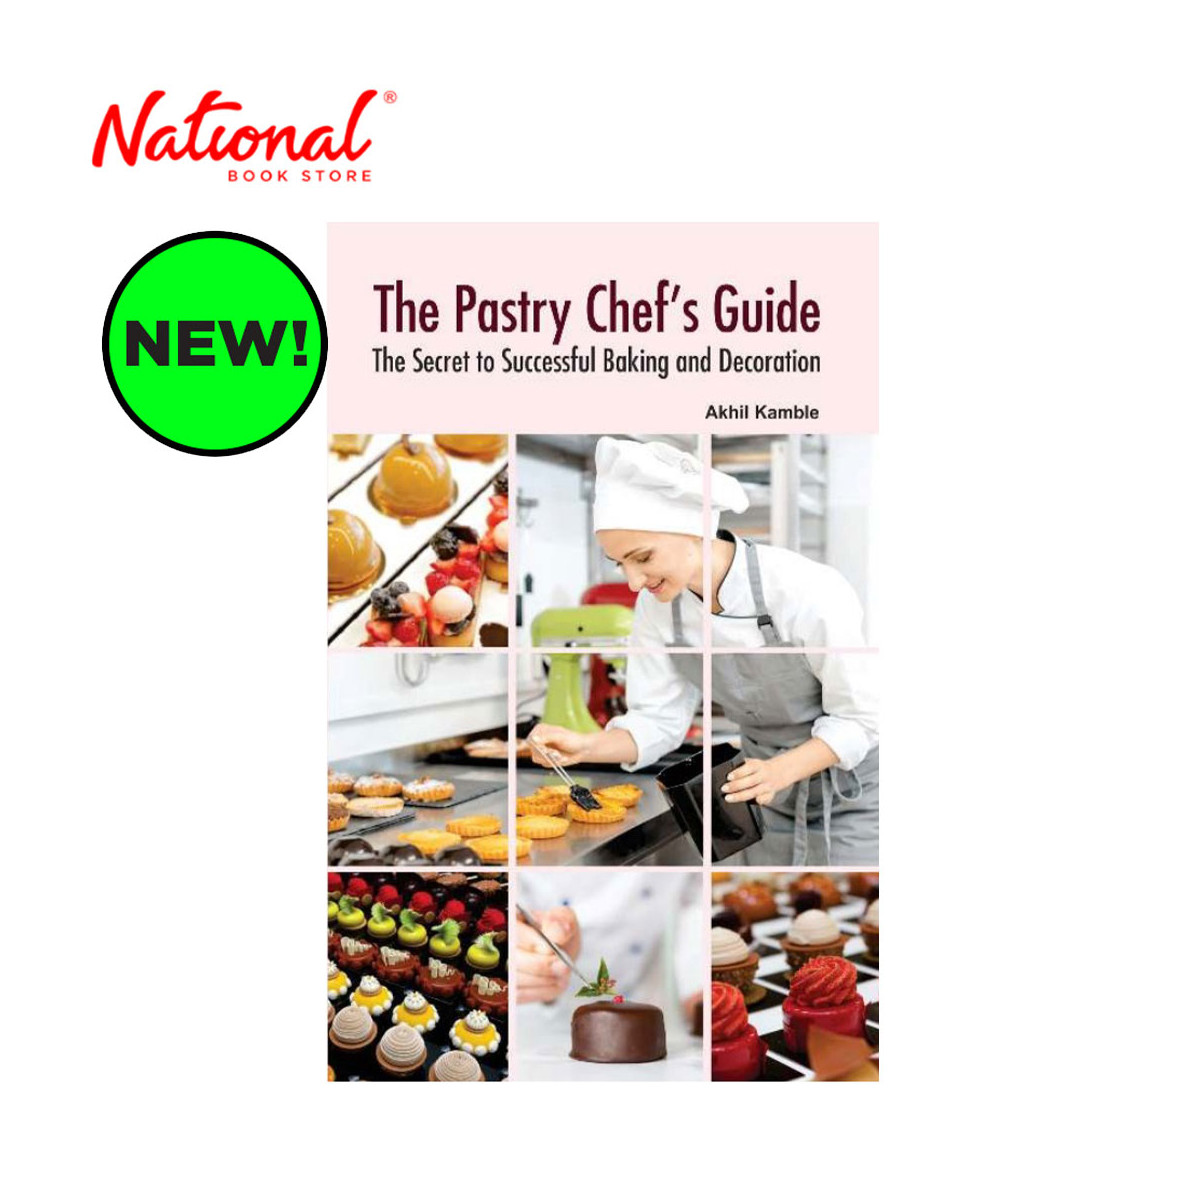 The Pastry Chef's Guide by Akhil Kamble - Trade Paperback - Culinary Books